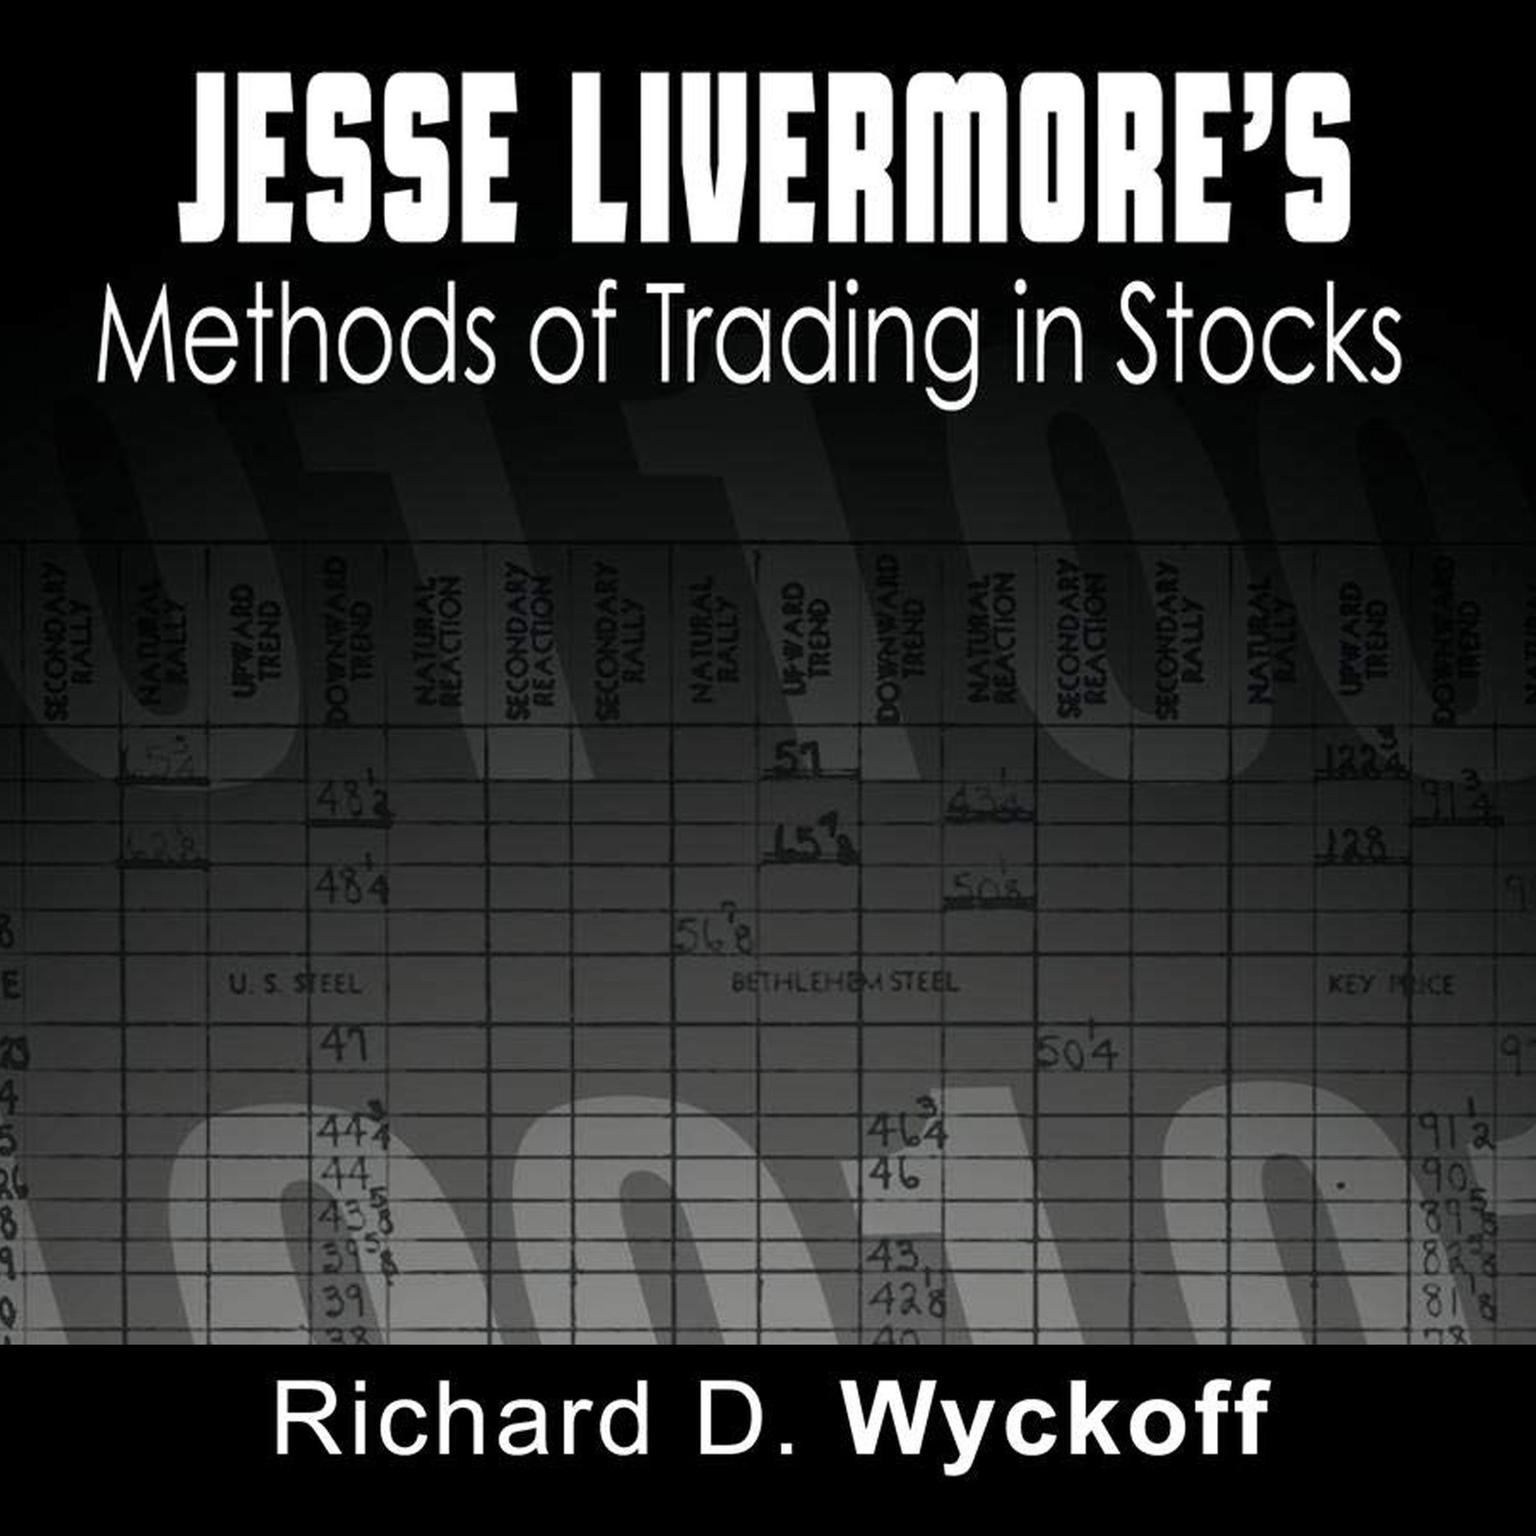 Jesse Livermores Methods of Trading in Stocks Audiobook, by Jesse Livermore